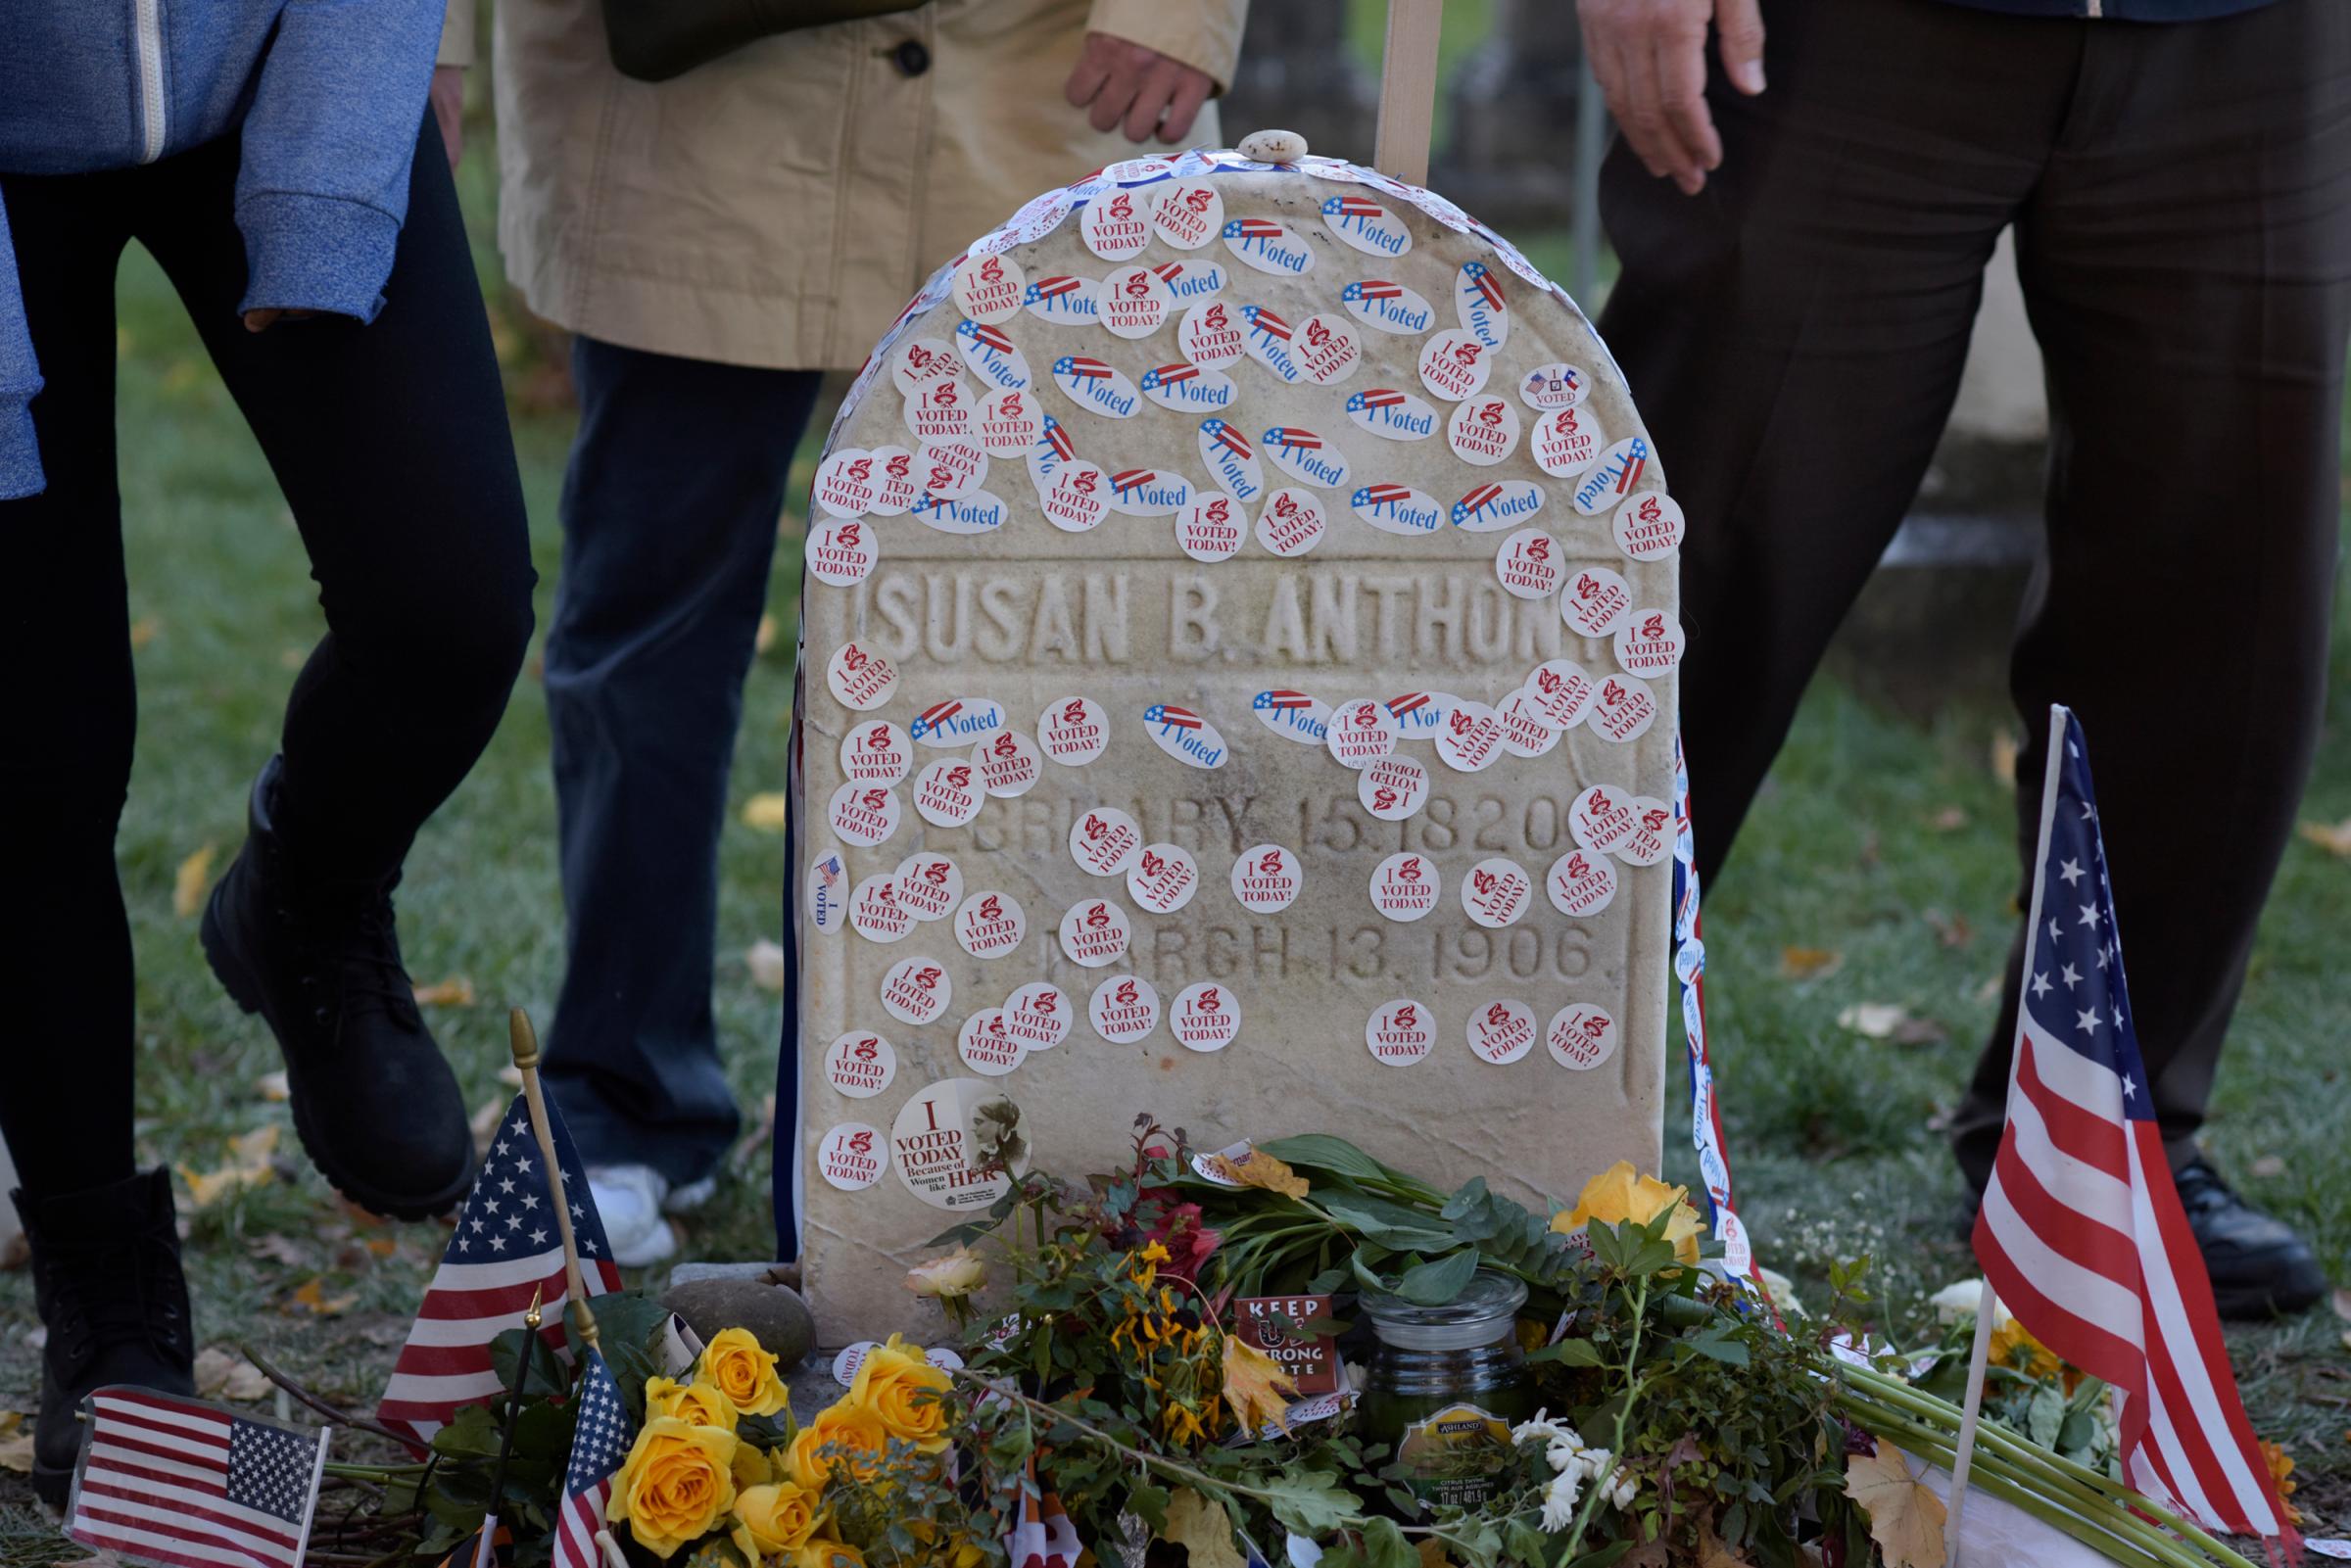 People visit the grave of women's suffrage leader Susan B. Anthony on U.S. election day at Mount Hope Cemetery in Rochester, New York